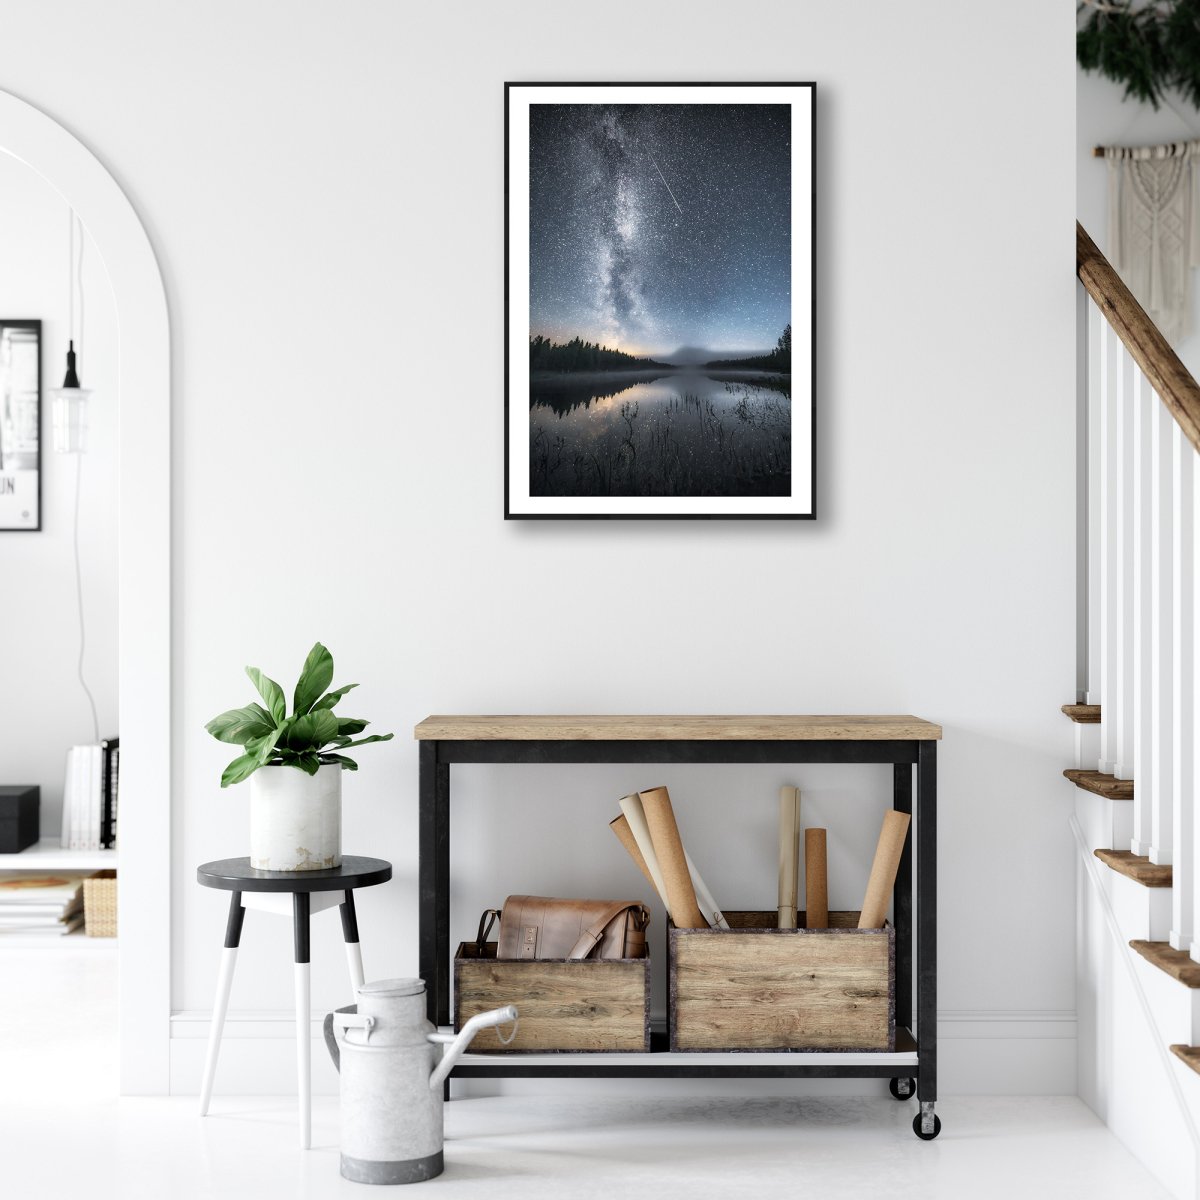 Framed photo of Milky Way, stars, and shooting star mirrored in lake, northern autumn night, white living room wall.